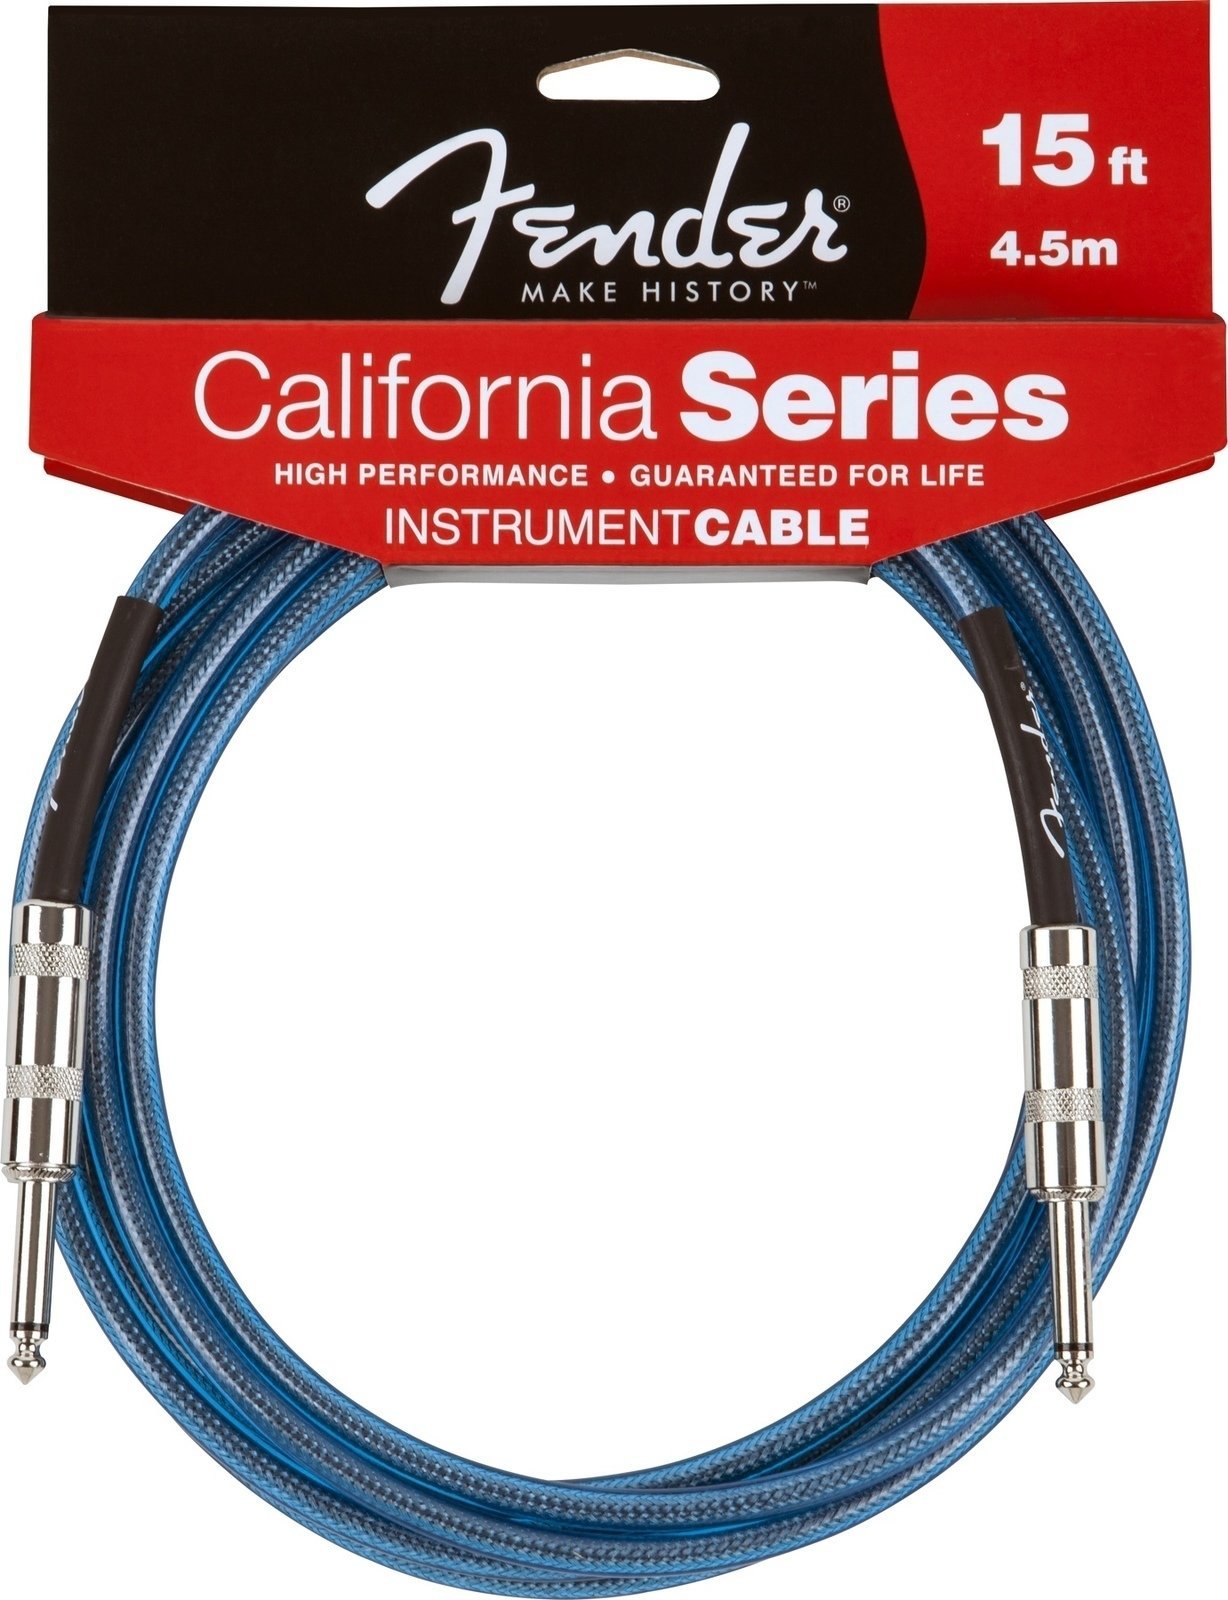 Instrument Cable Fender California Instrument Cable 4,5m - Lake Placid Blue